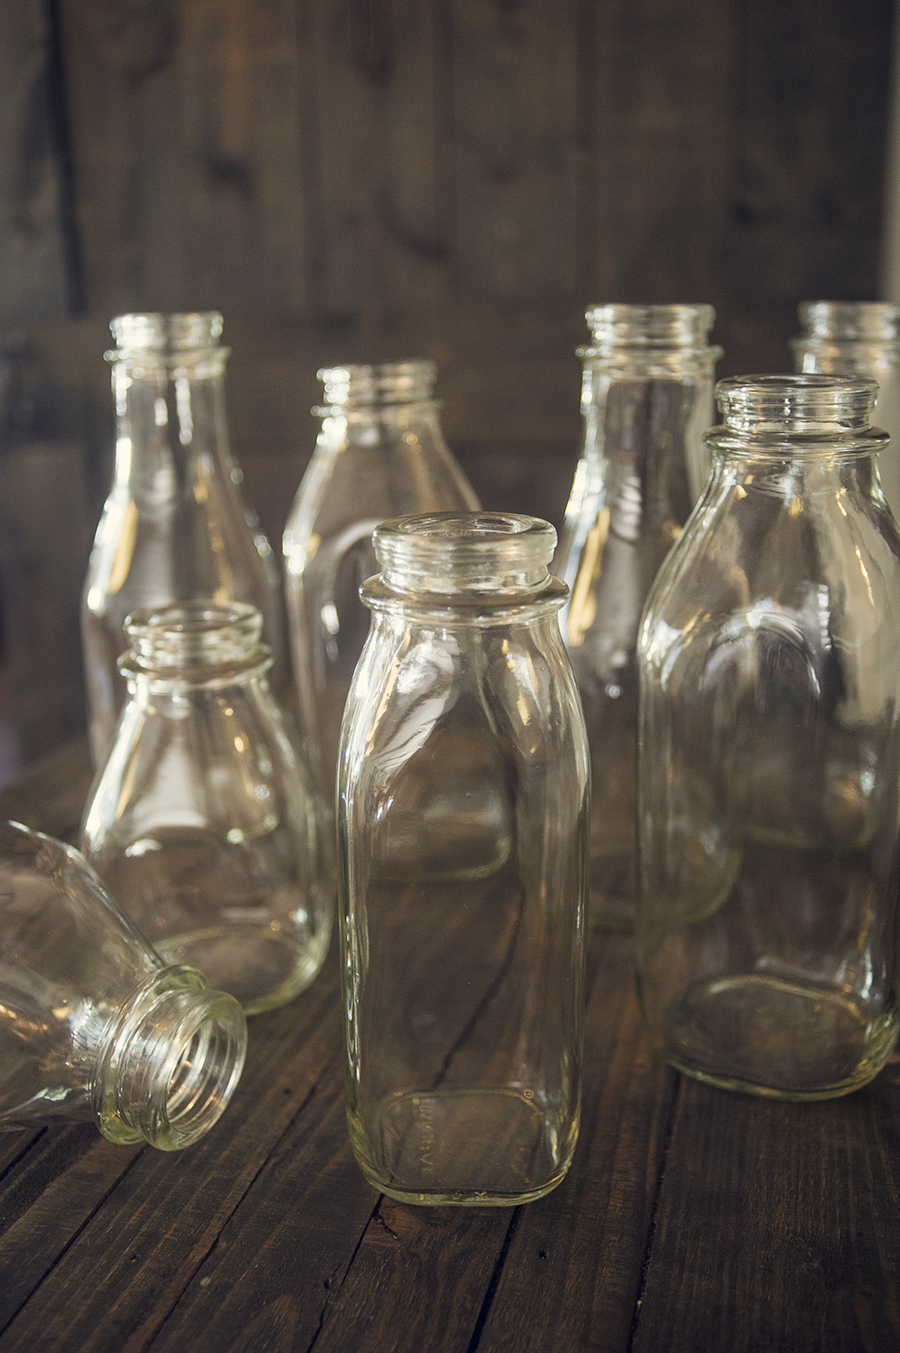 Glass Milk Bottles - Reliable Glass Bottles, Jars, Containers